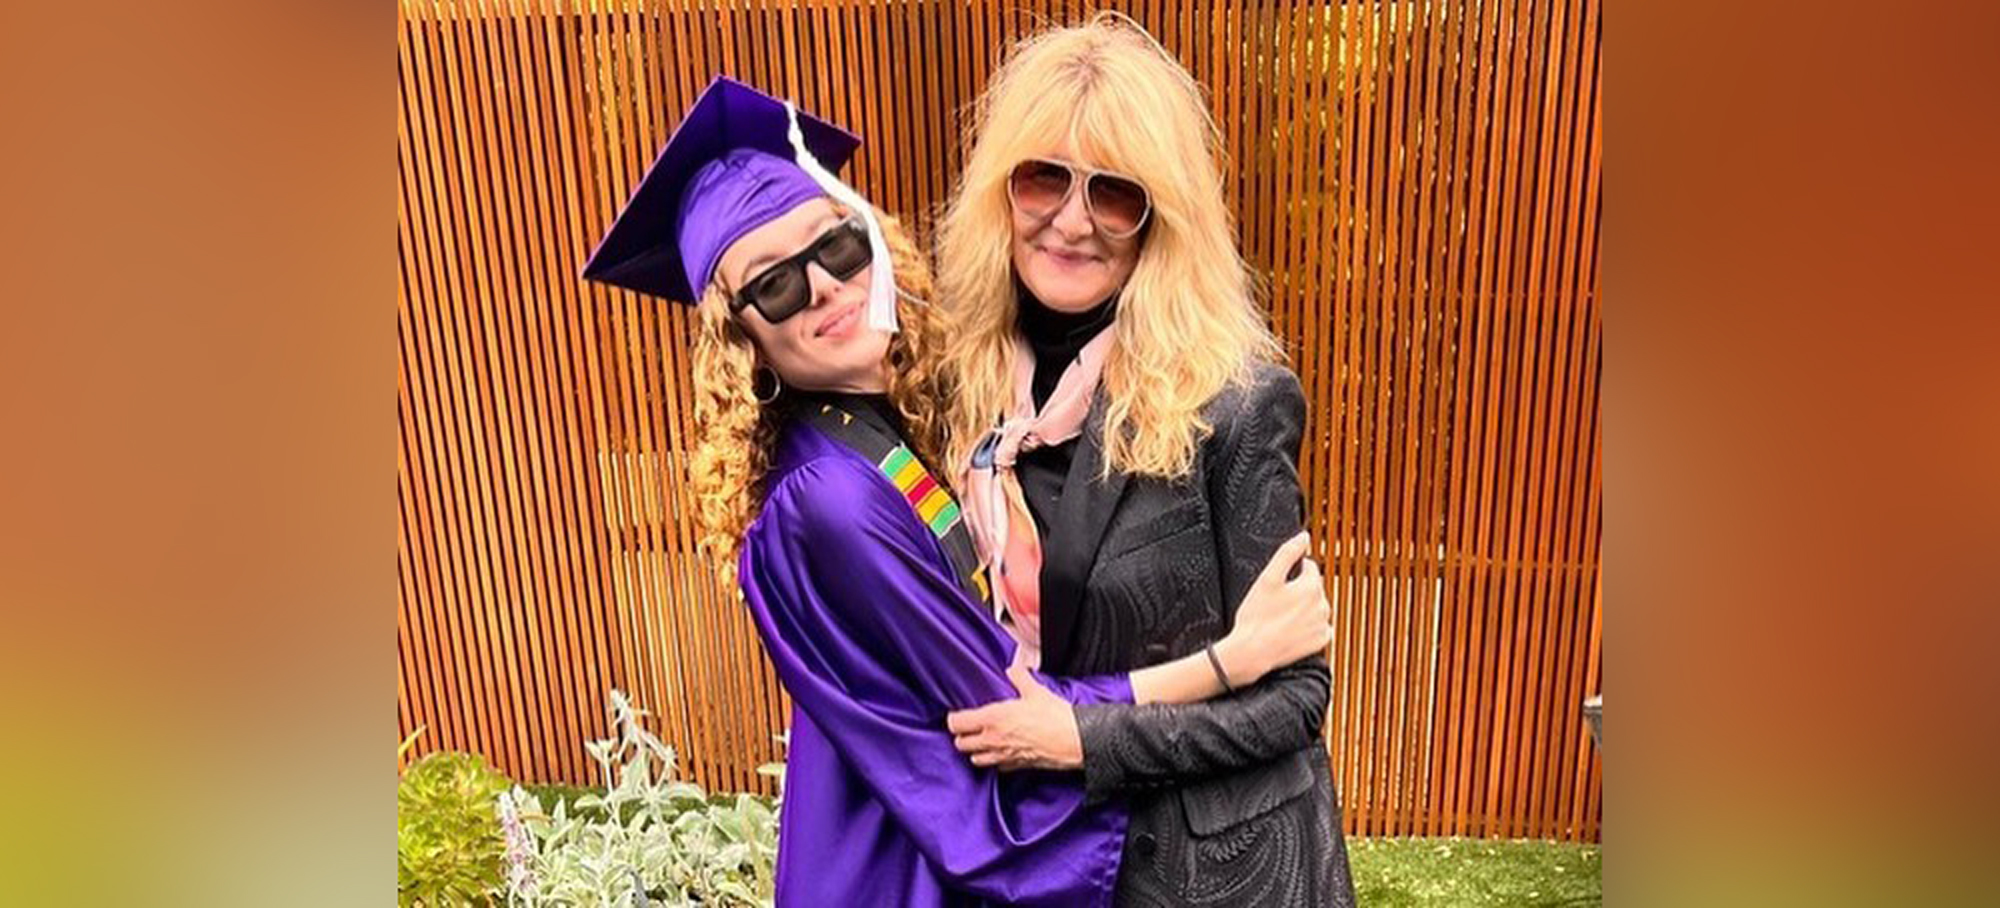 PHOTO: Laura Dern poses with her daughter Jaya Harper at her graduation in this photo Dern shared on Instagram.